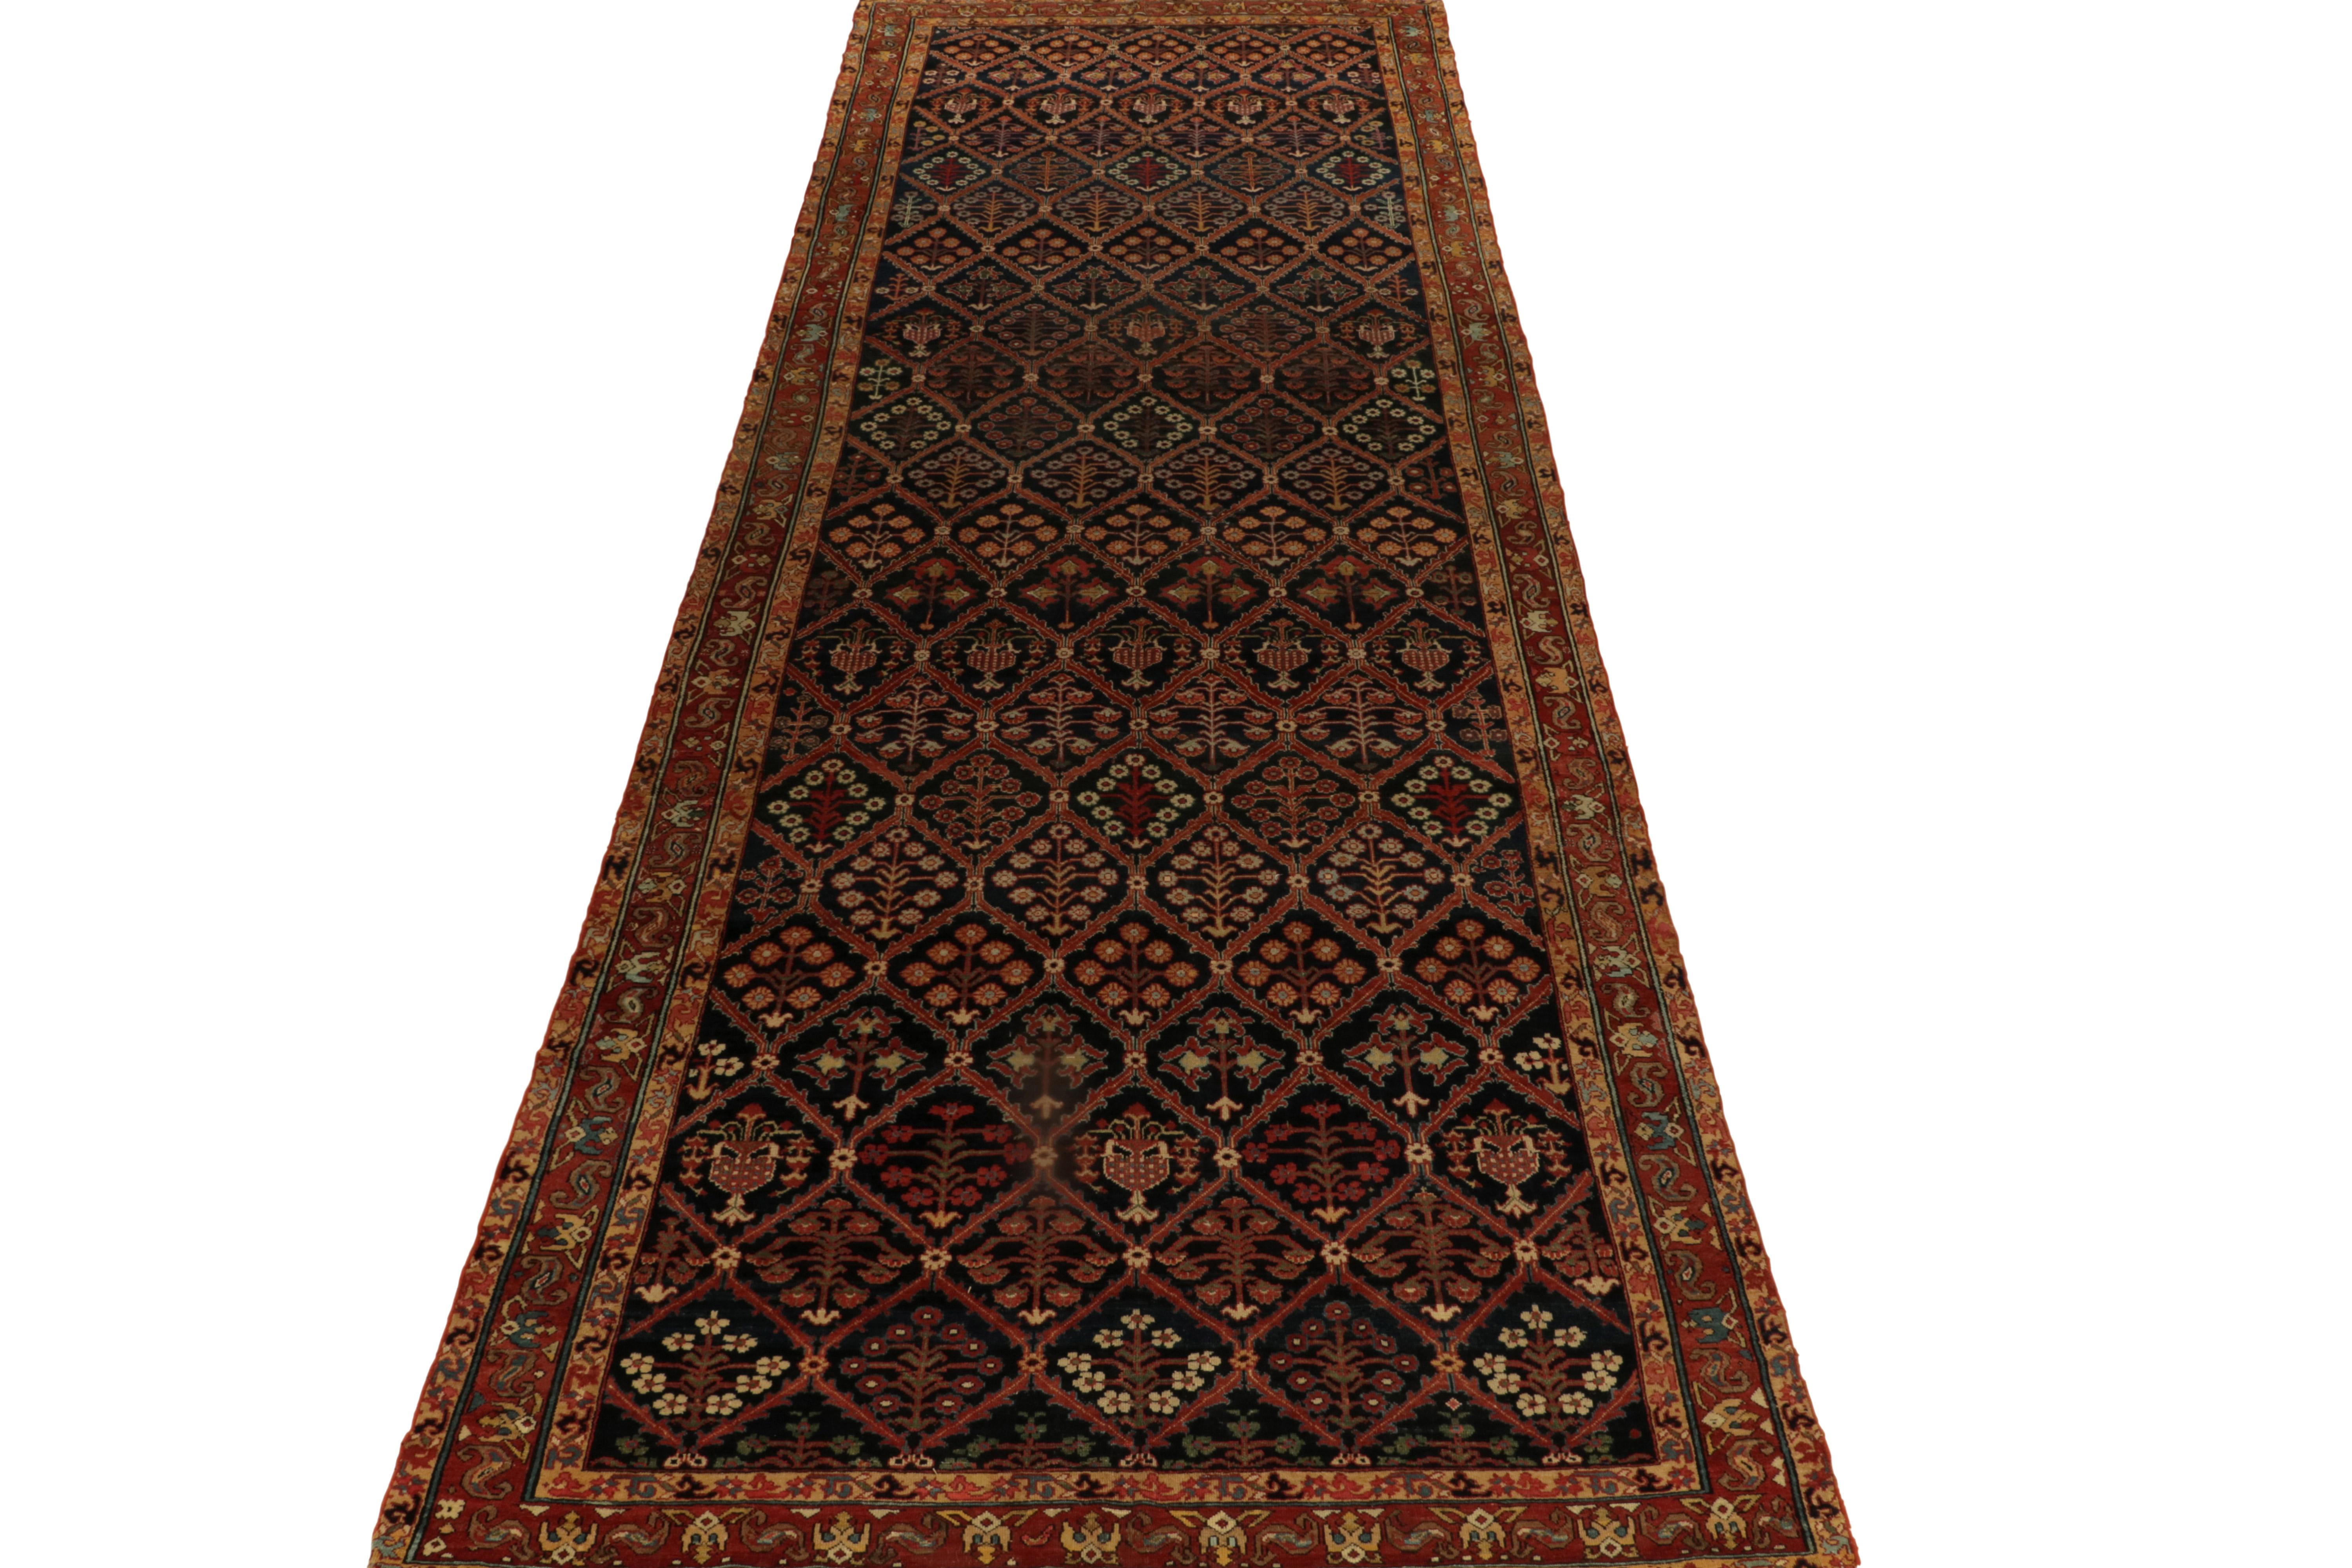 Hand-Knotted Rare Antique Persian Joshaghan rug in Red, Black & Golden-Brown Floral Patterns For Sale